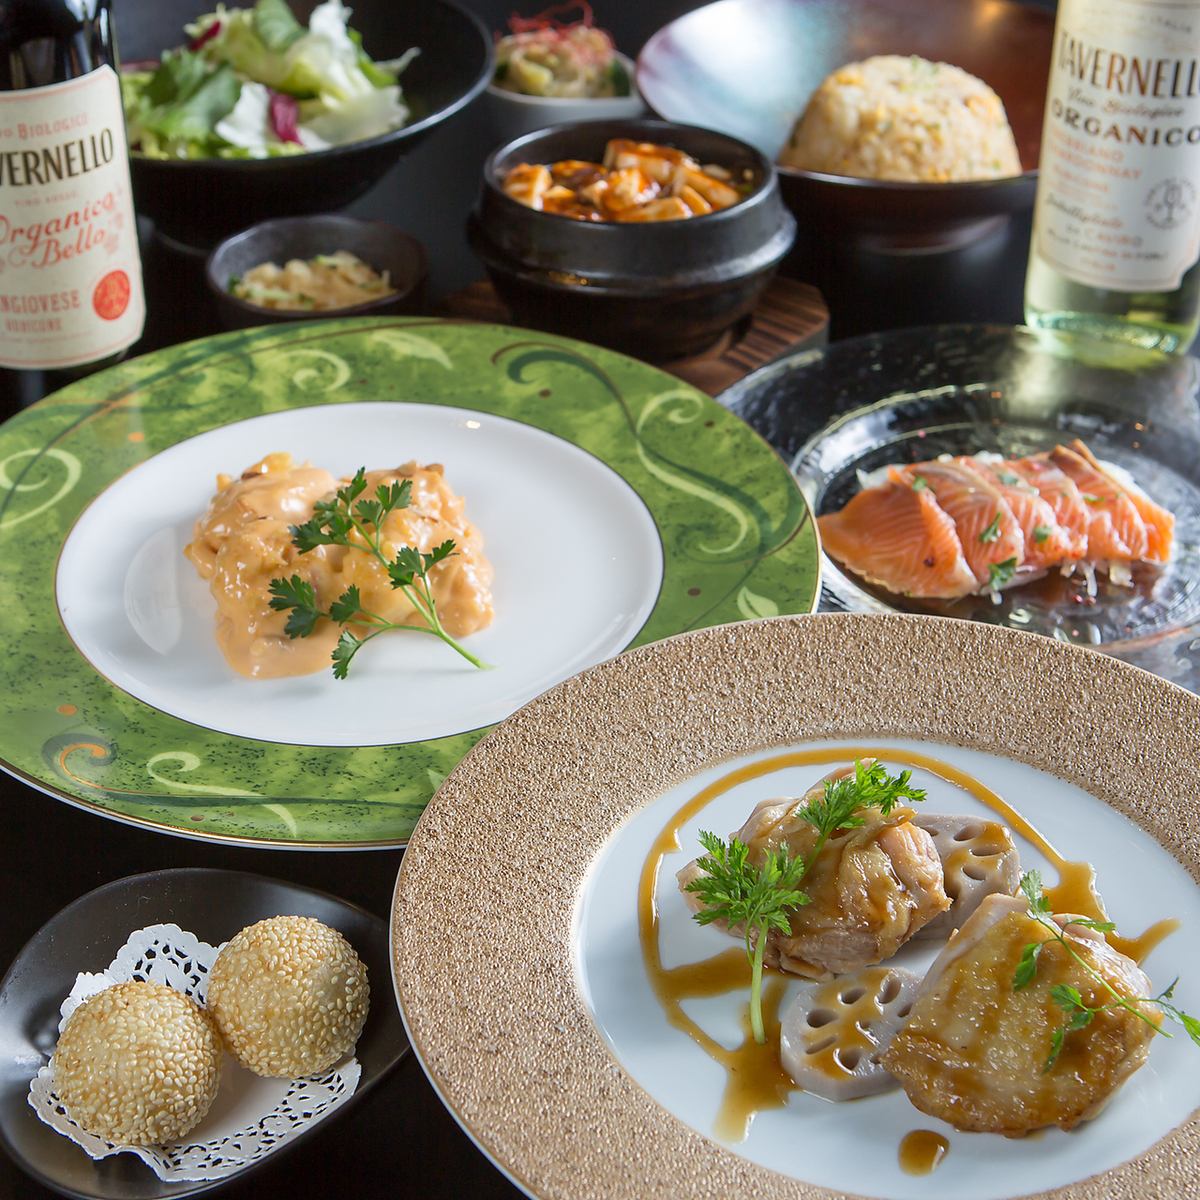 Give yourself a luxurious reward with the prix fixe course available on the day♪